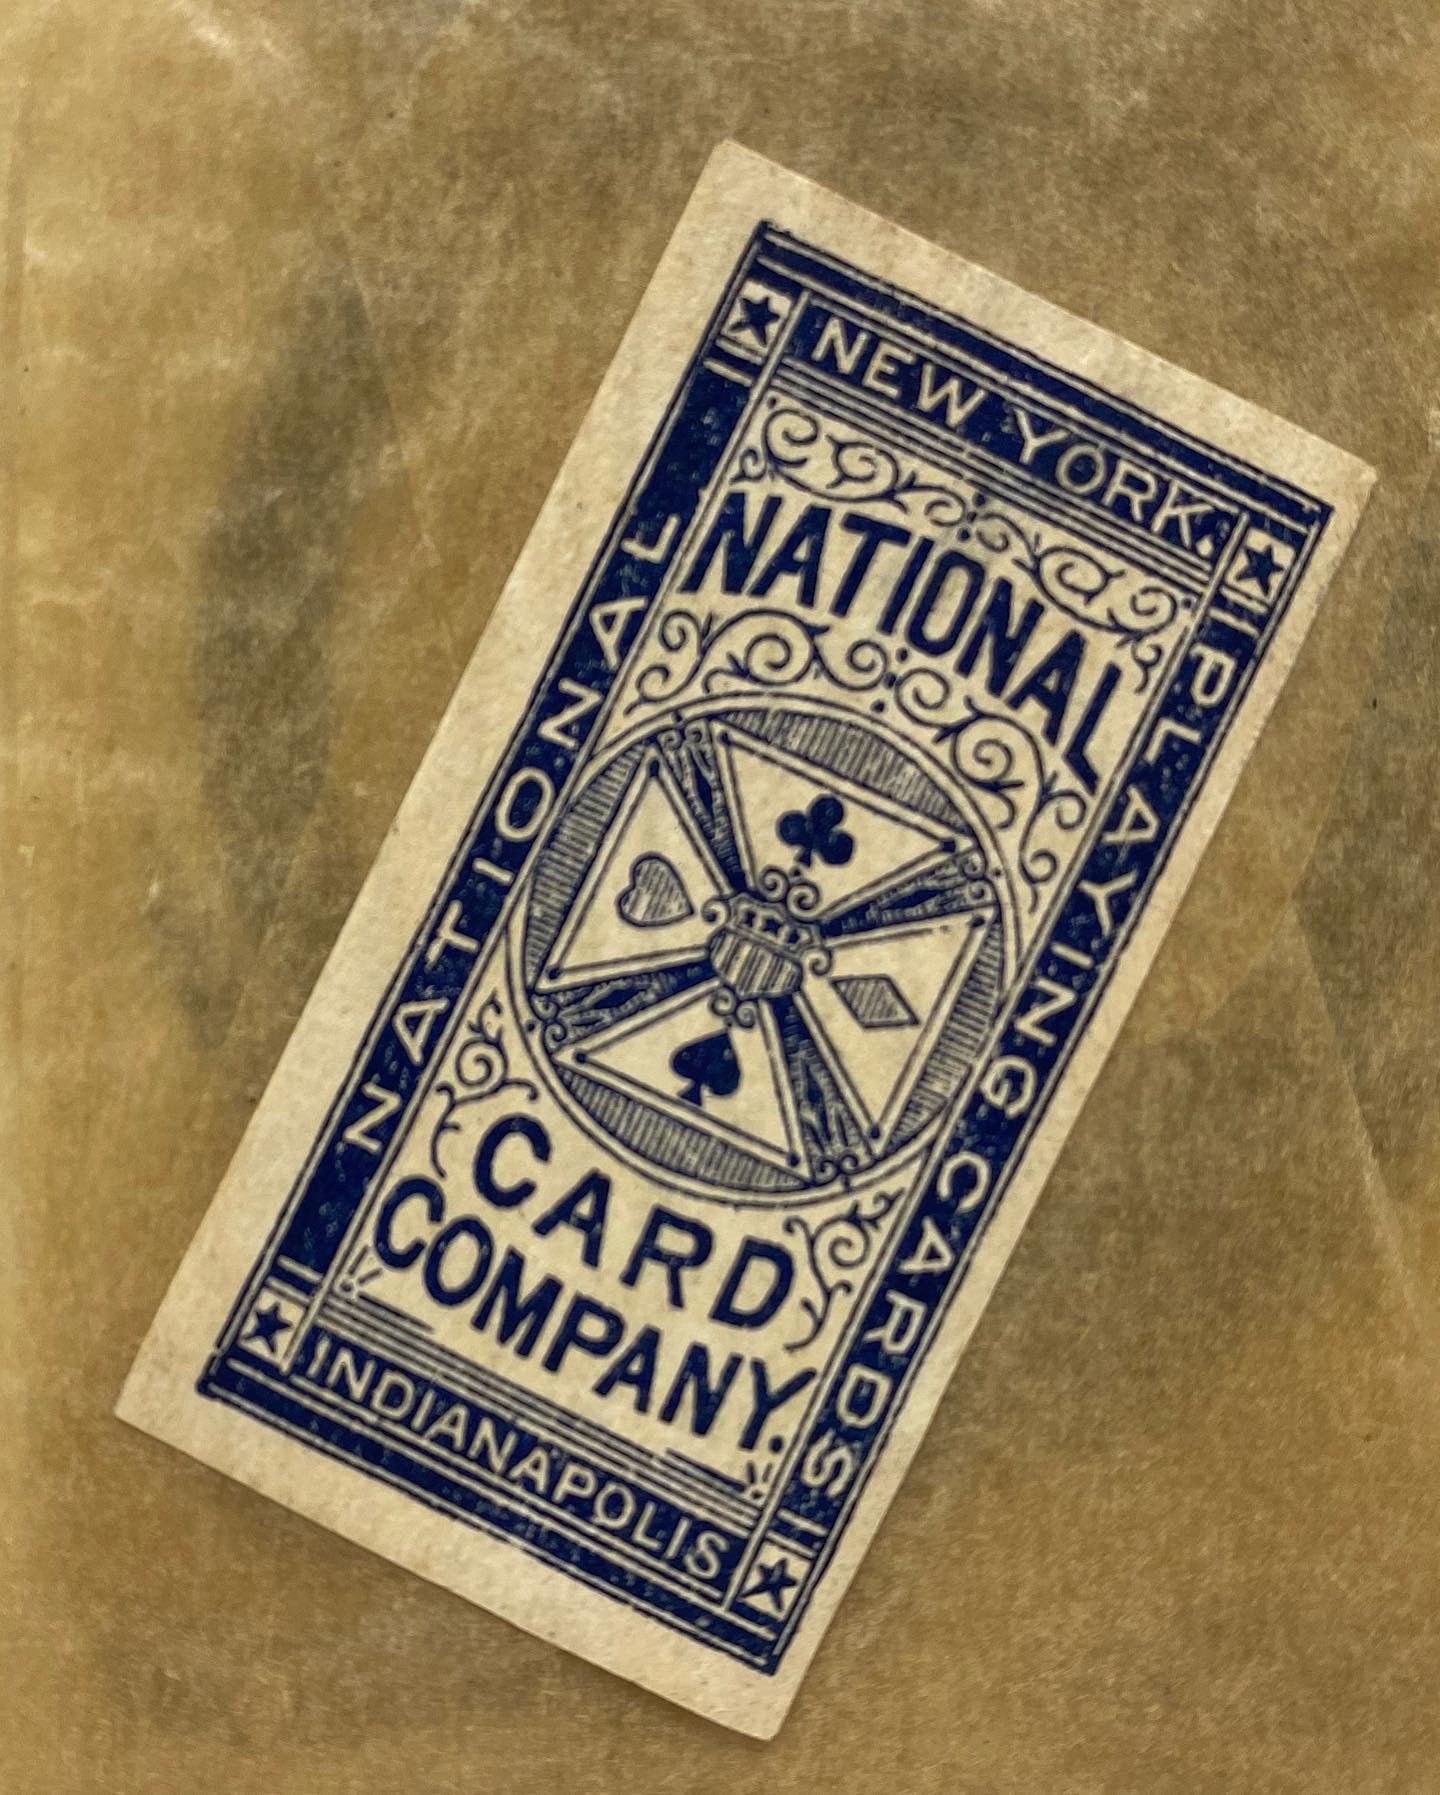 8 playing cards by the National Card Co., c.1895.